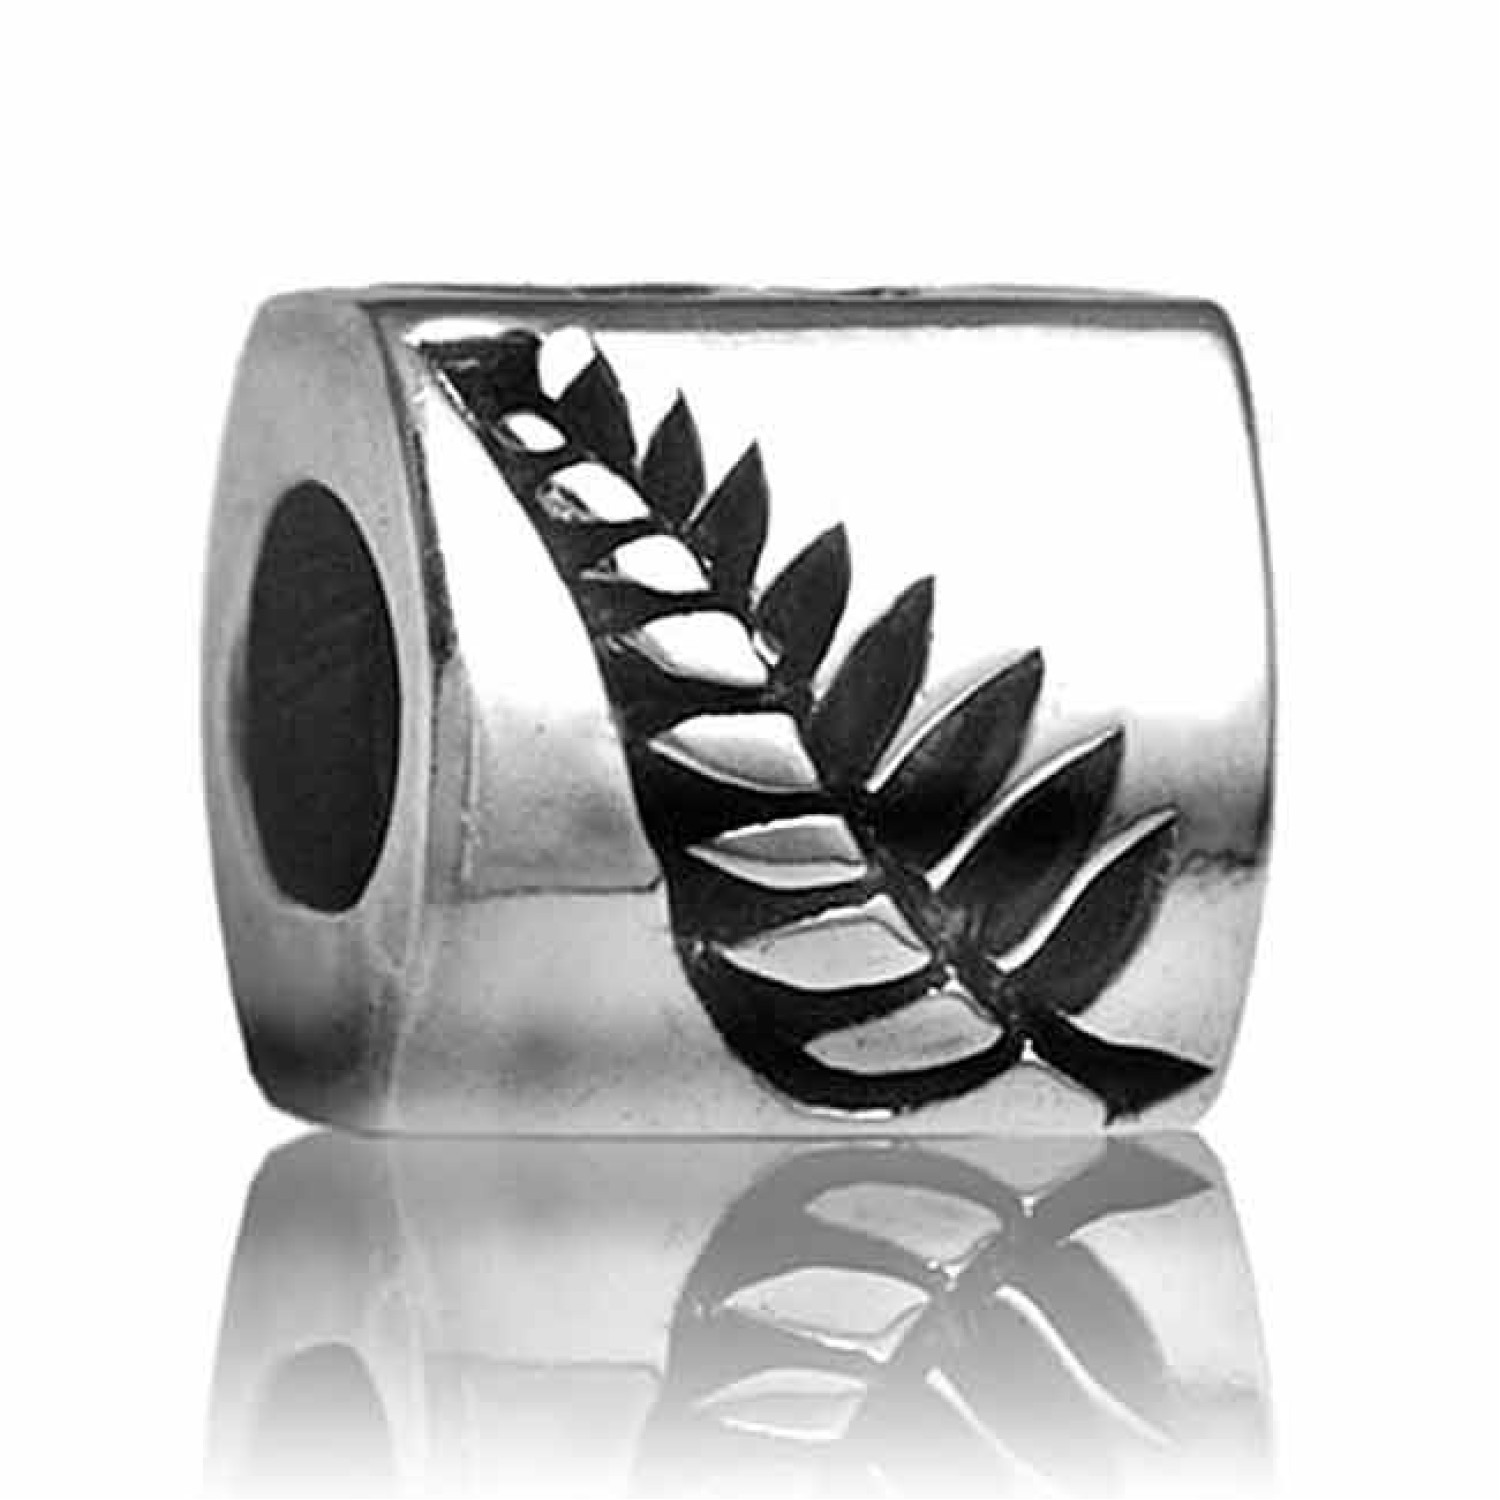 LK064 Evolve NZ Fern. Evolve Jewellery Silver Fern By wearing Evolve New Zealand jewellery you celebrate Aotearoa and the most important events in your life in a very visual way, safeguarding your ever evolving memories for a lifetime Sterli @christies.on